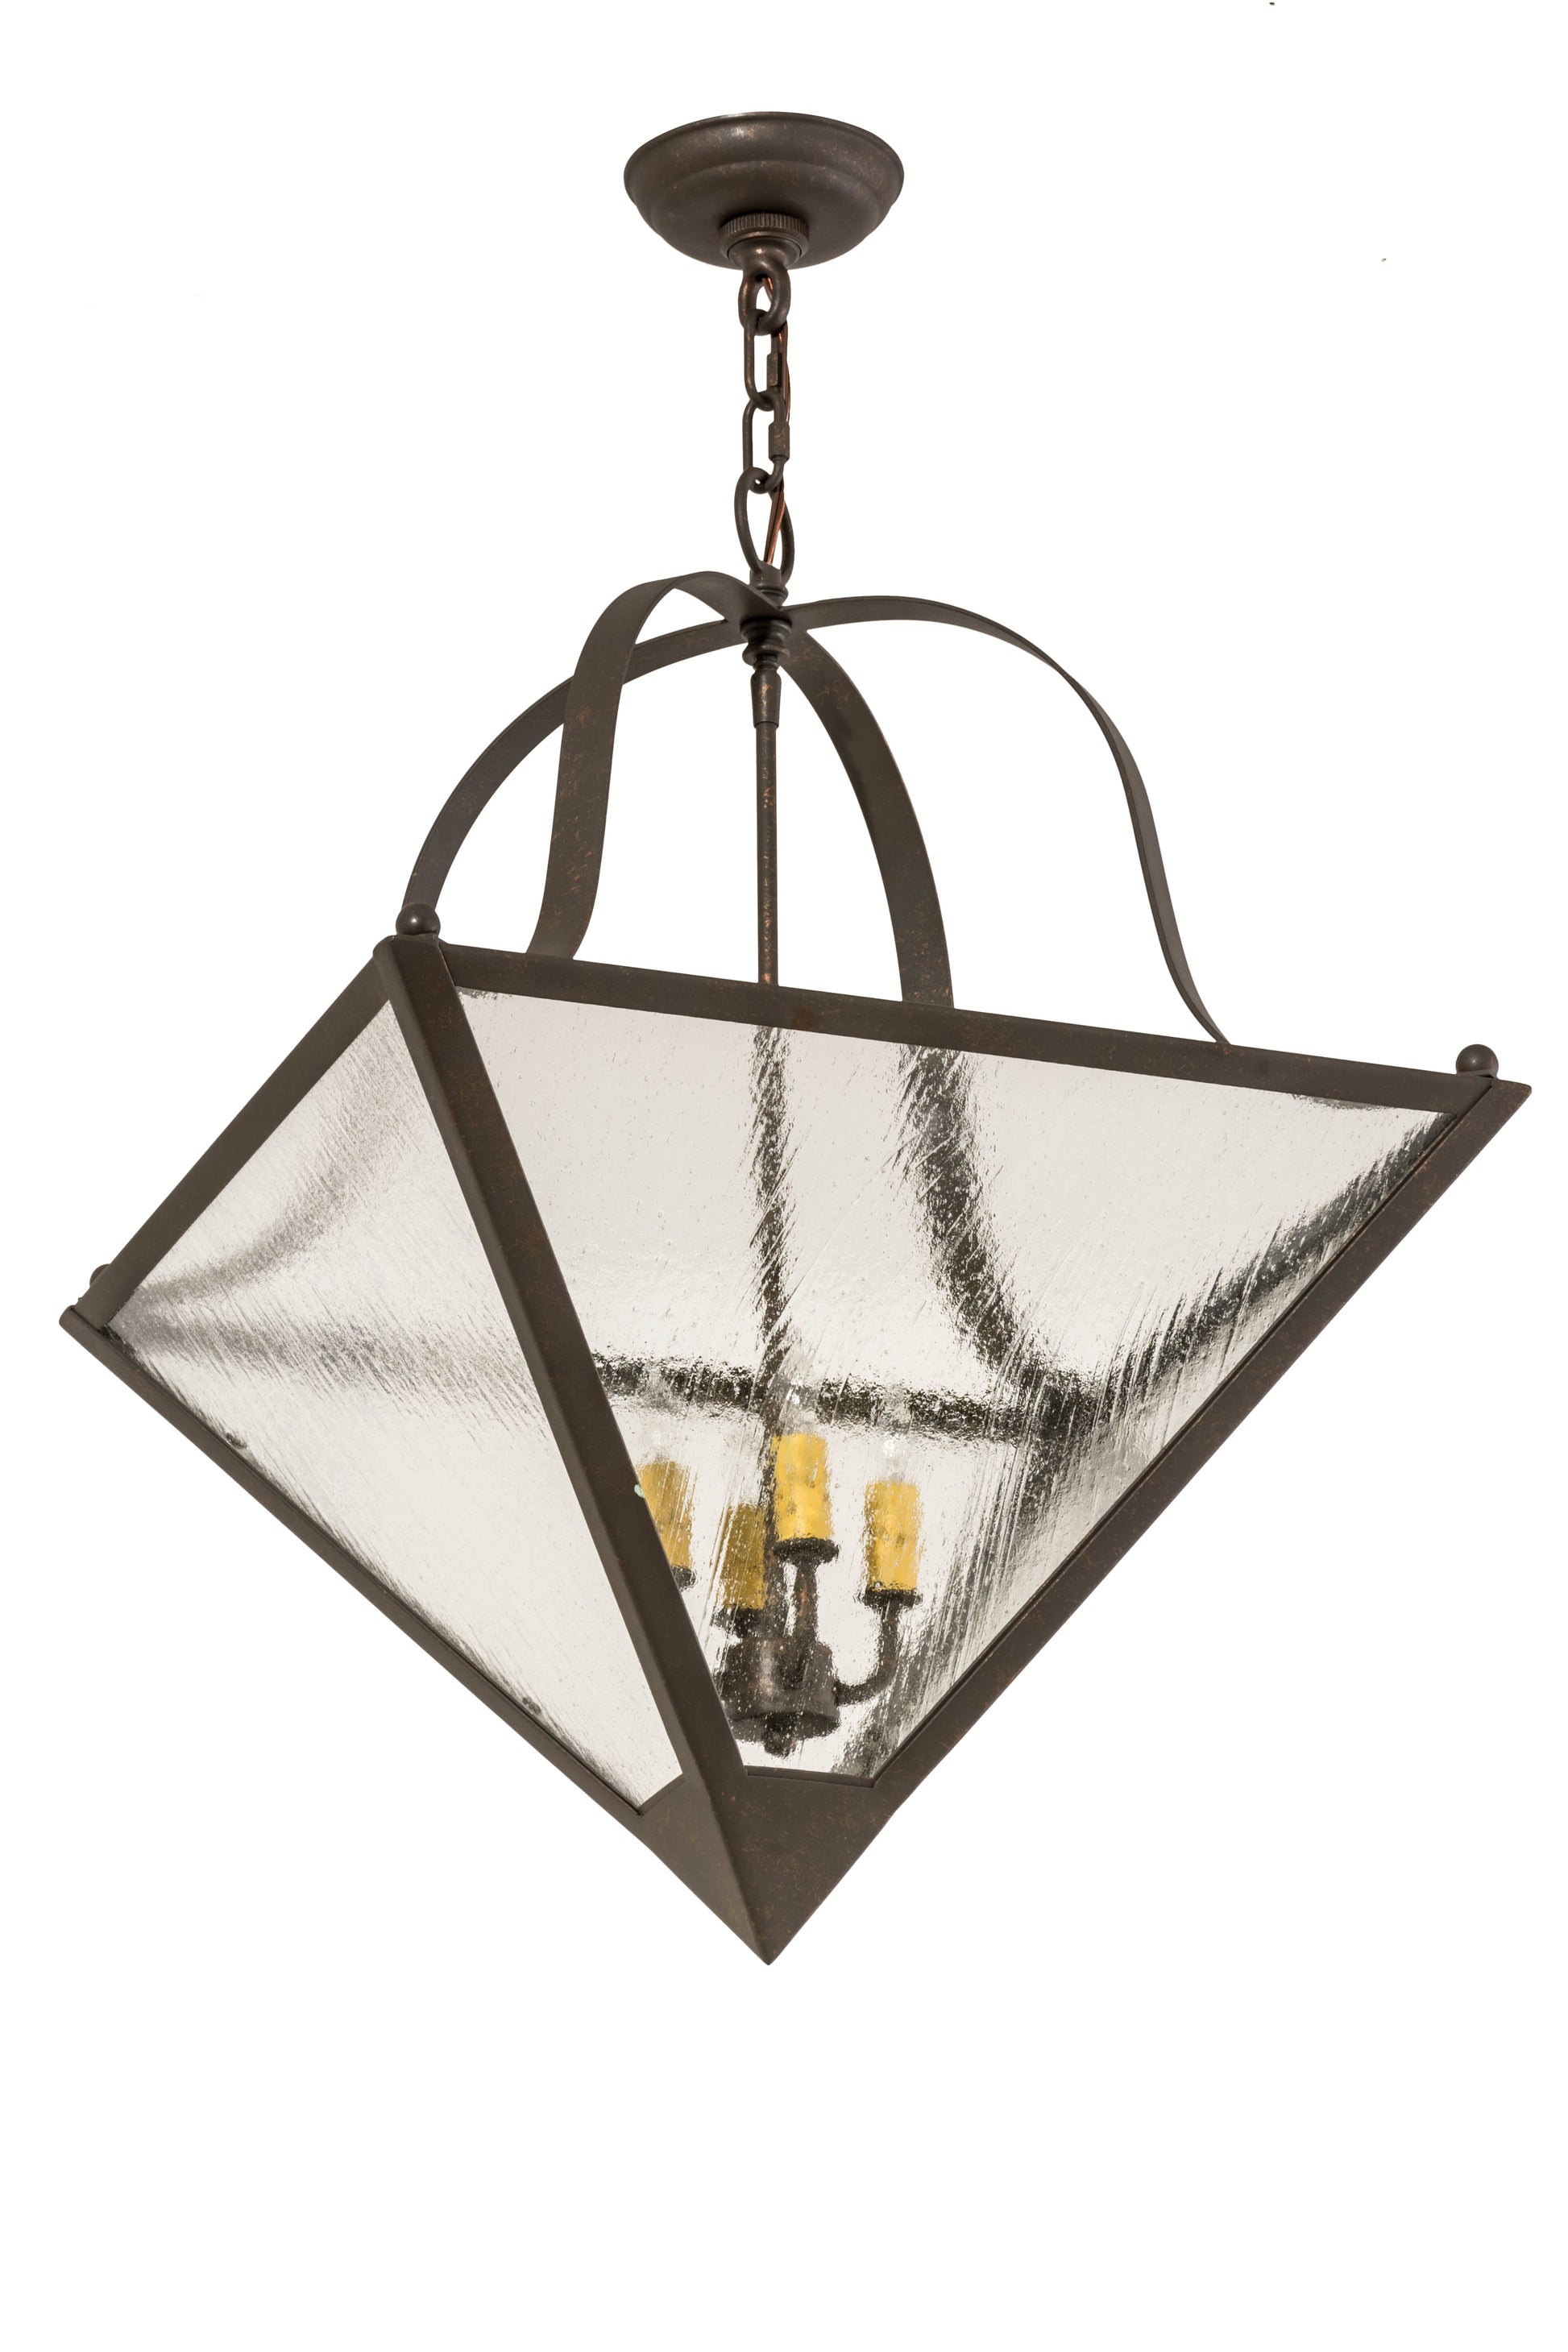 20" Square Zale Inverted Pendant by 2nd Ave Lighting